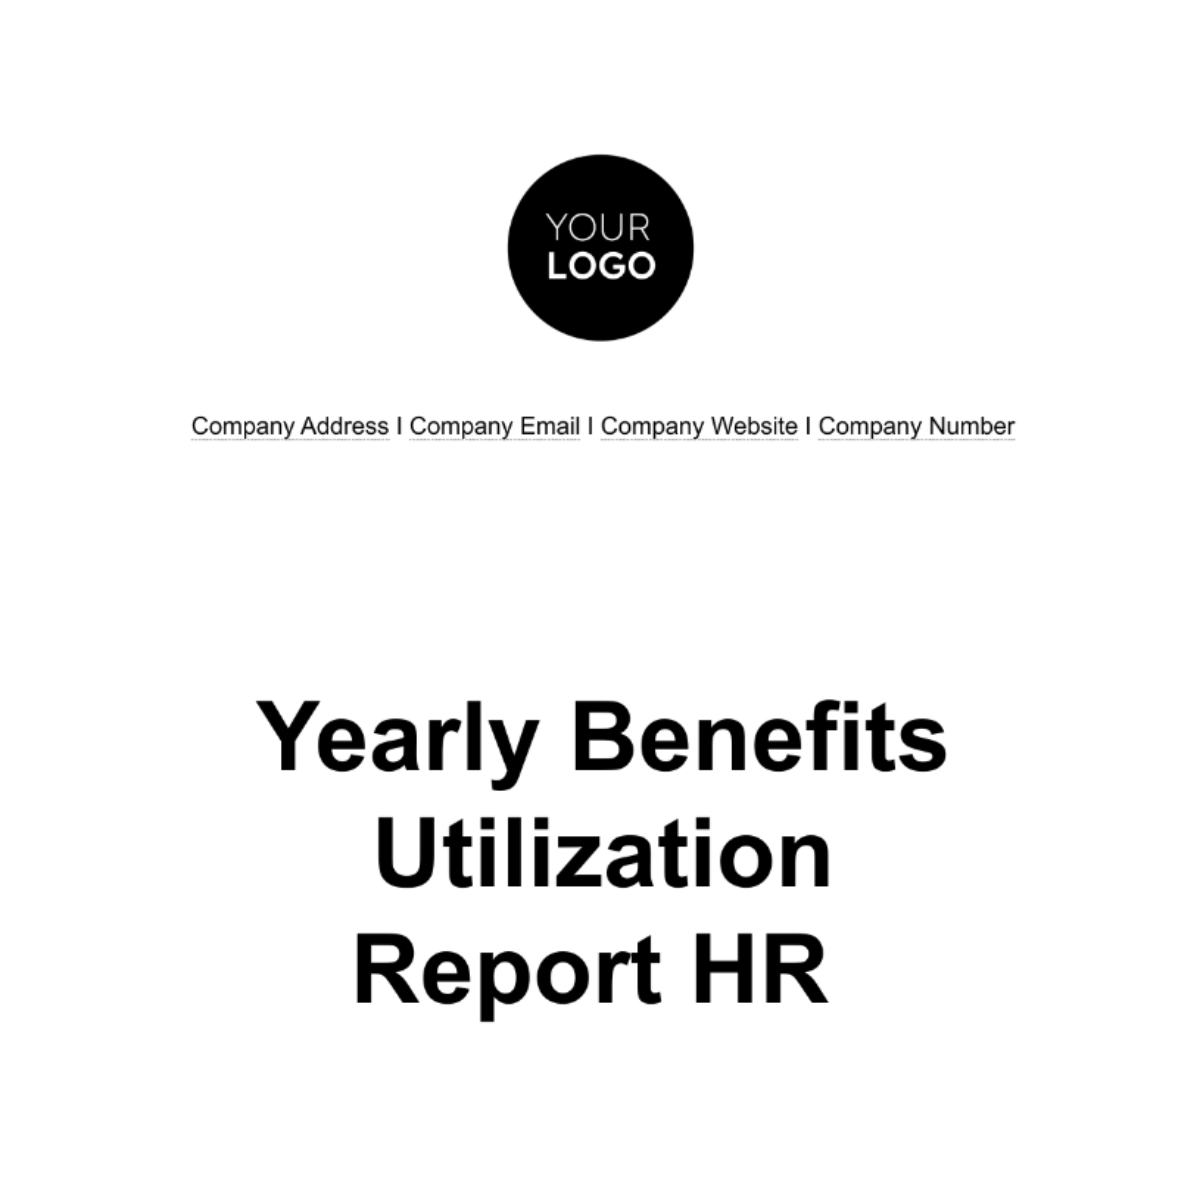 Yearly Benefits Utilization Report HR Template